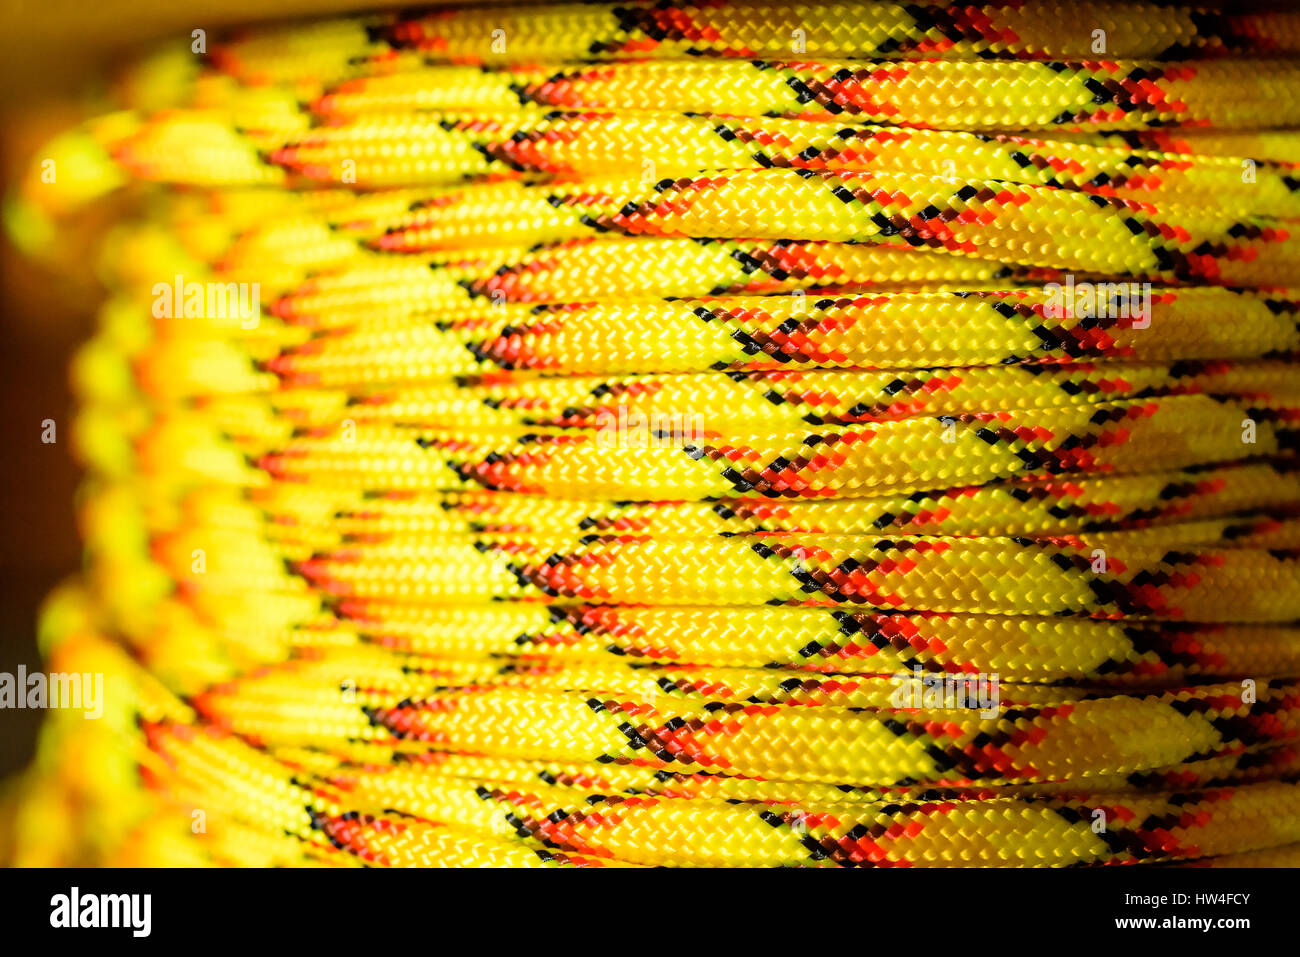 Parachute cord or paracord on spool. Yellow, red and black nylon kernmantle  rope of interwoven strands often used as craft material or outdoor surviva  Stock Photo - Alamy